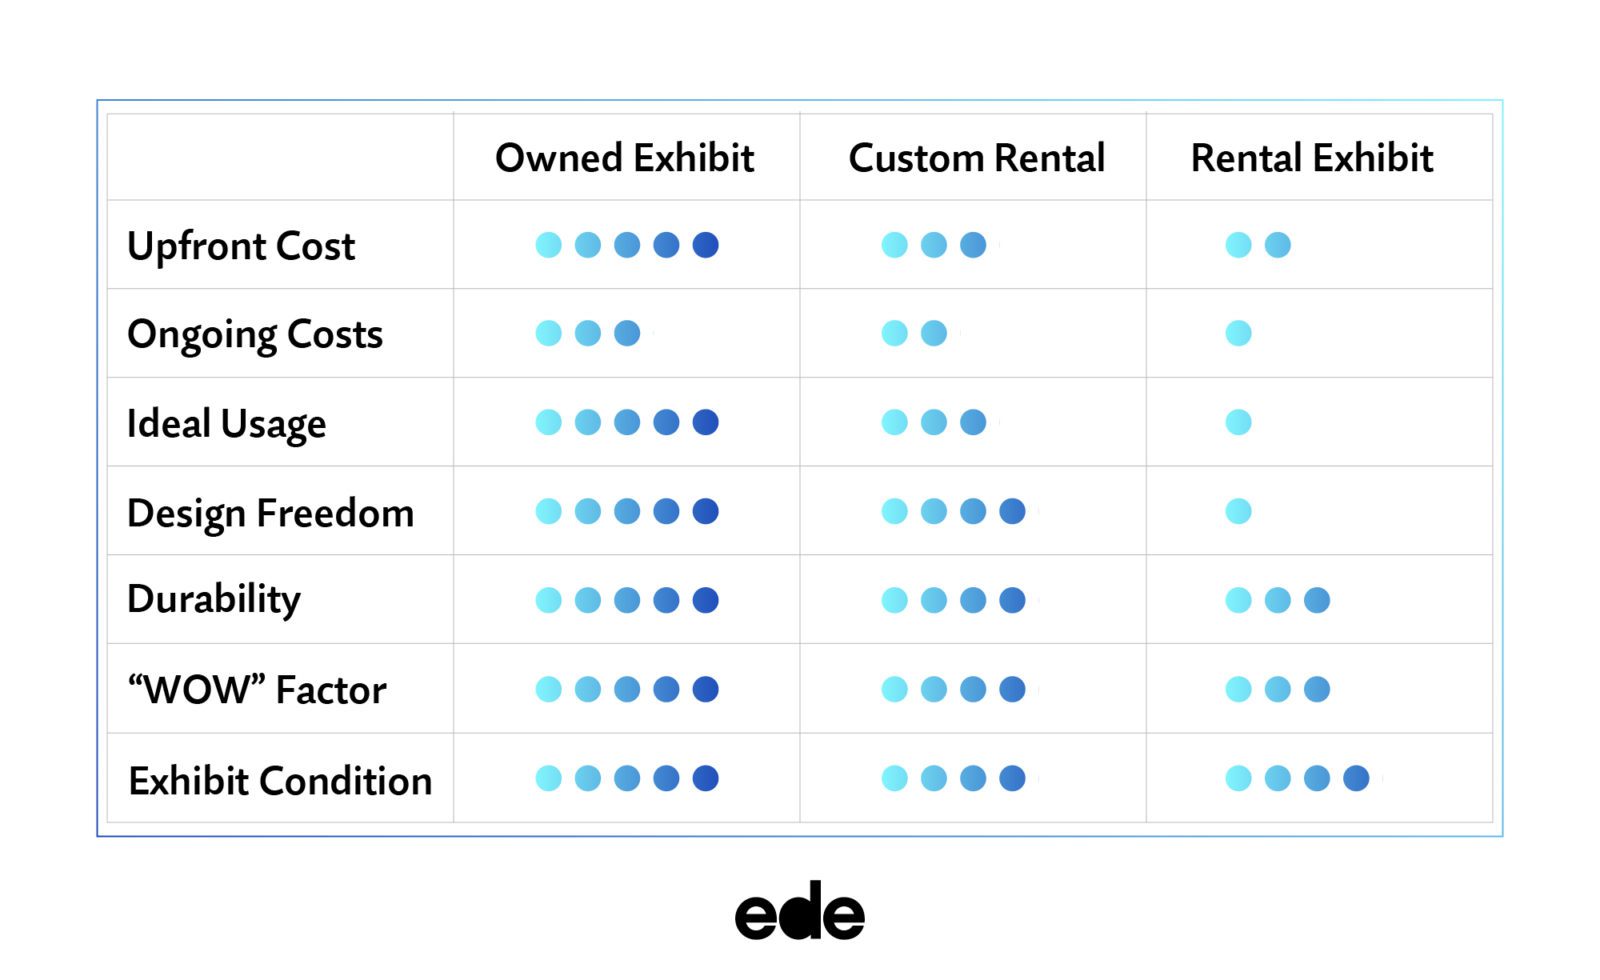 A comparison chart of owned, custom rental, and rental exhibits.